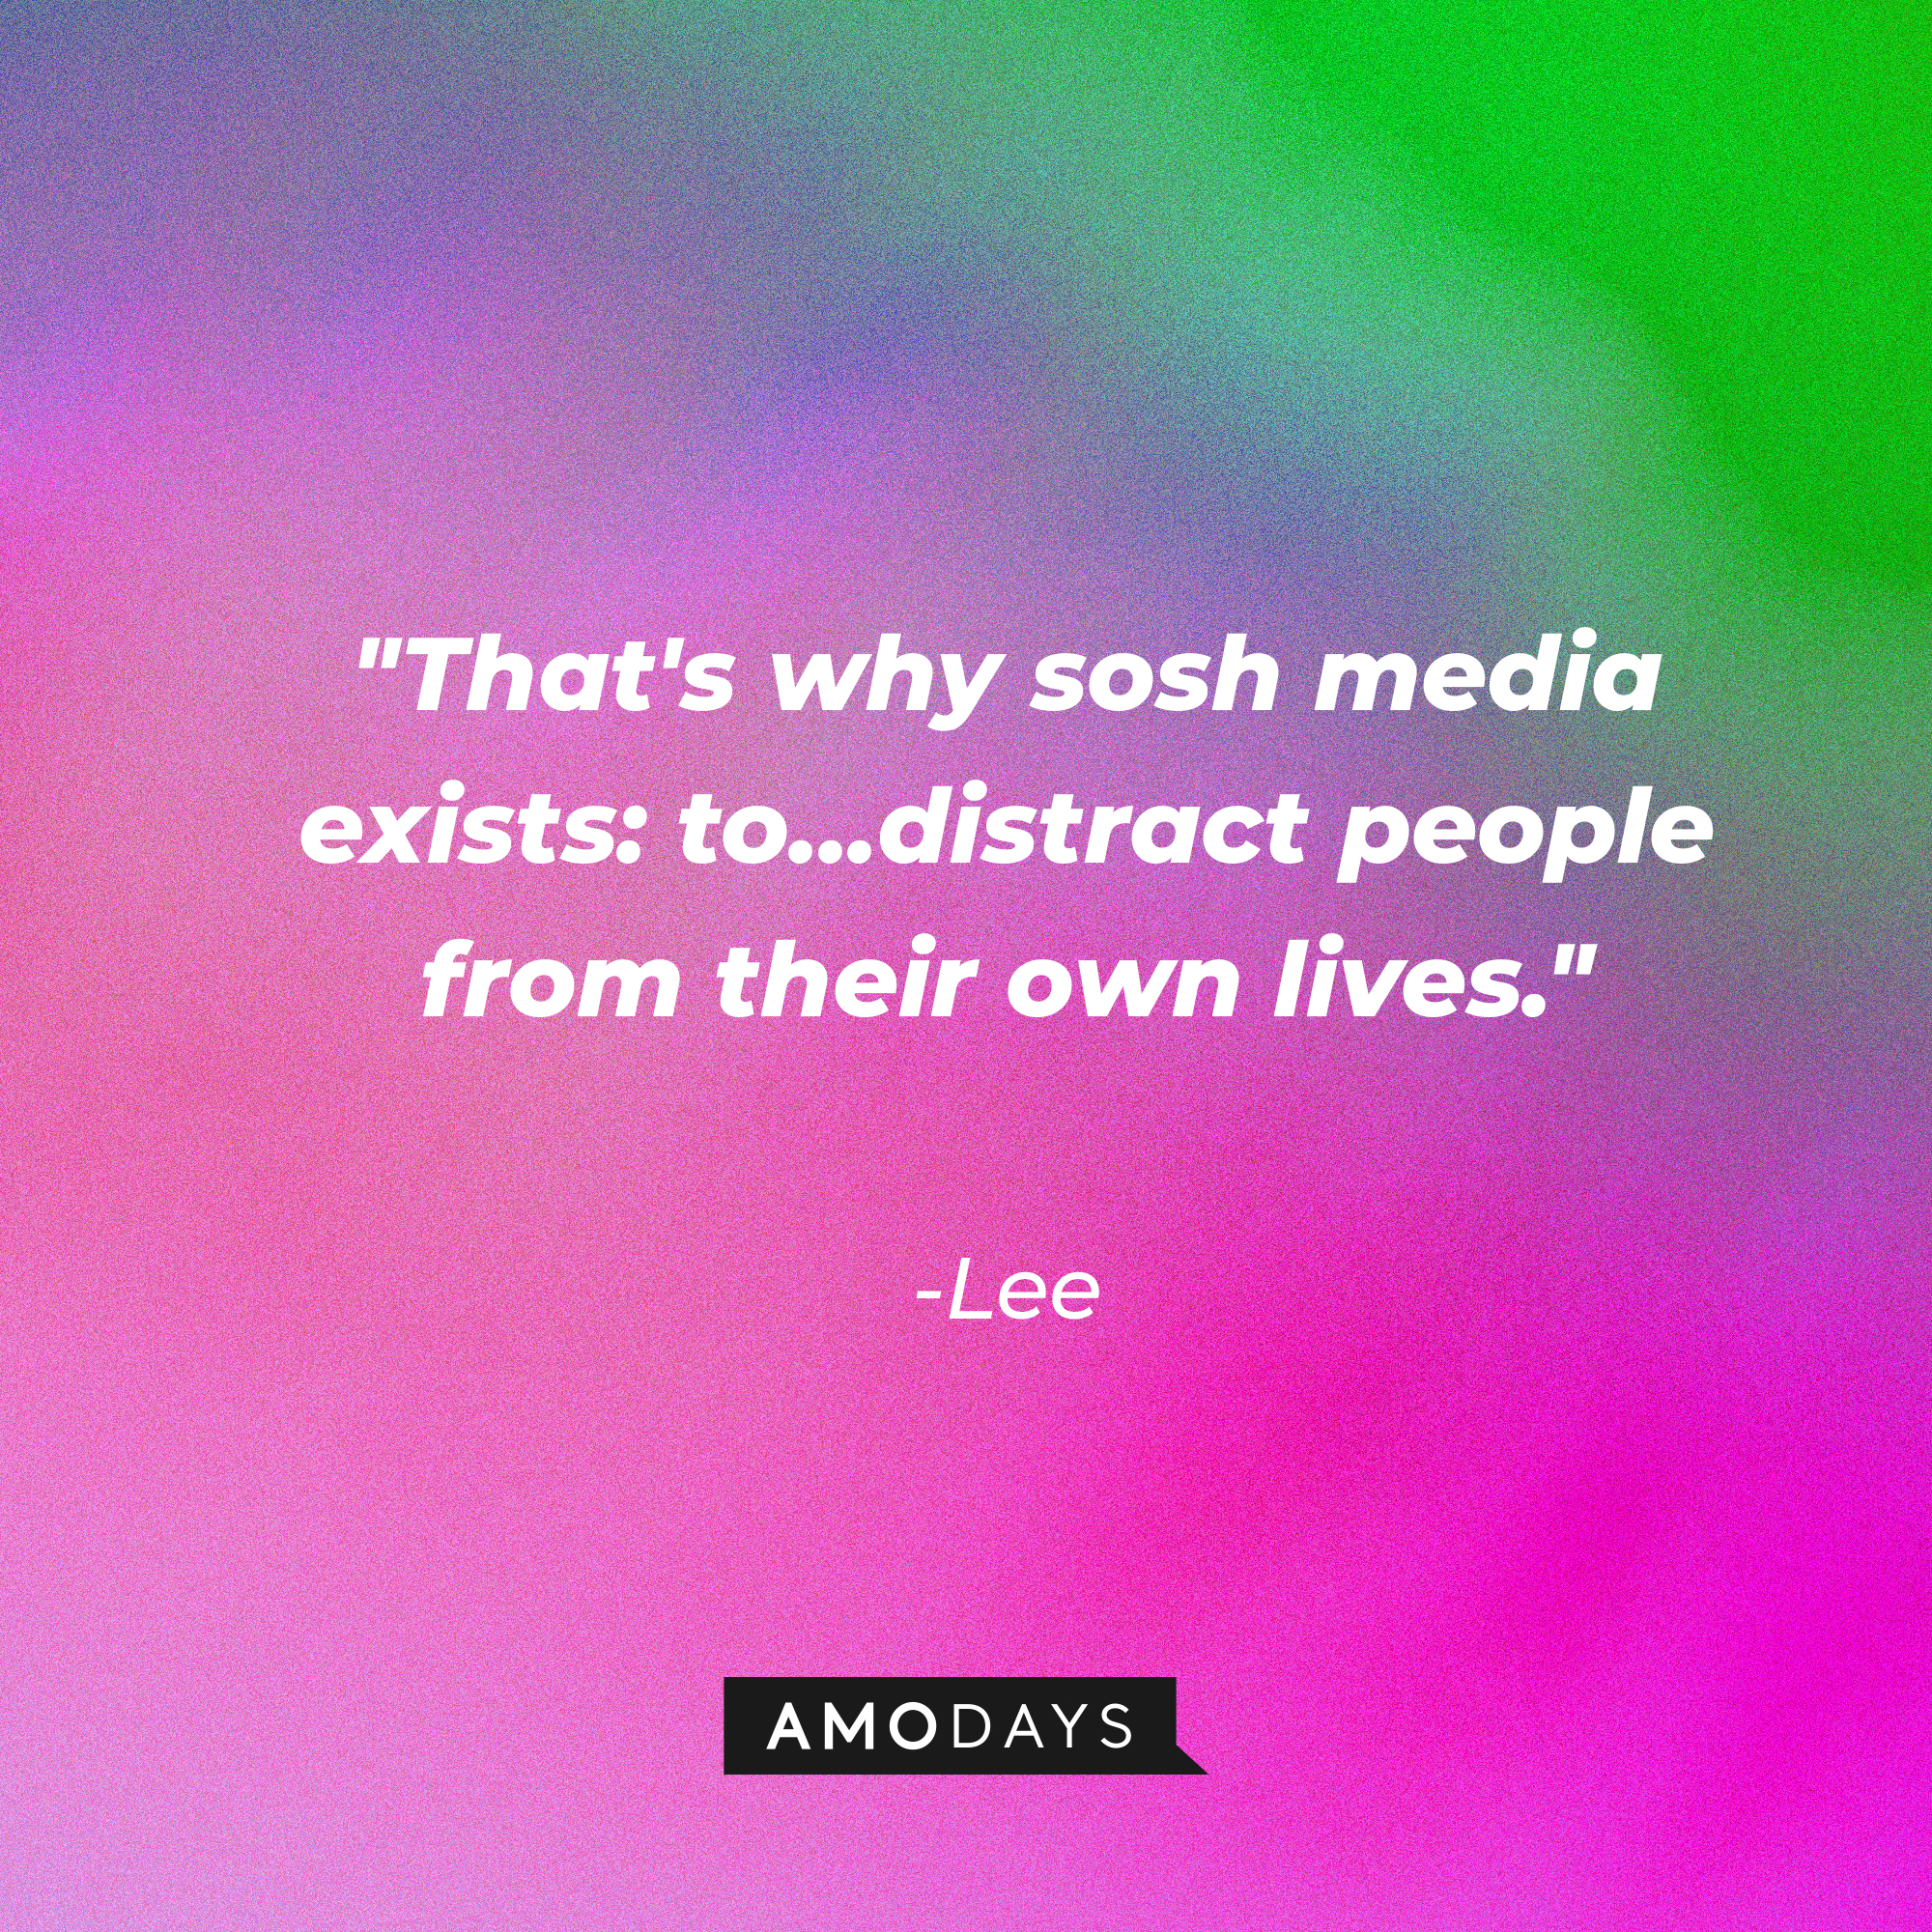 Lee's quote: "That's why sosh media exists: to…distract people from their own lives.” | Source: AmoDays